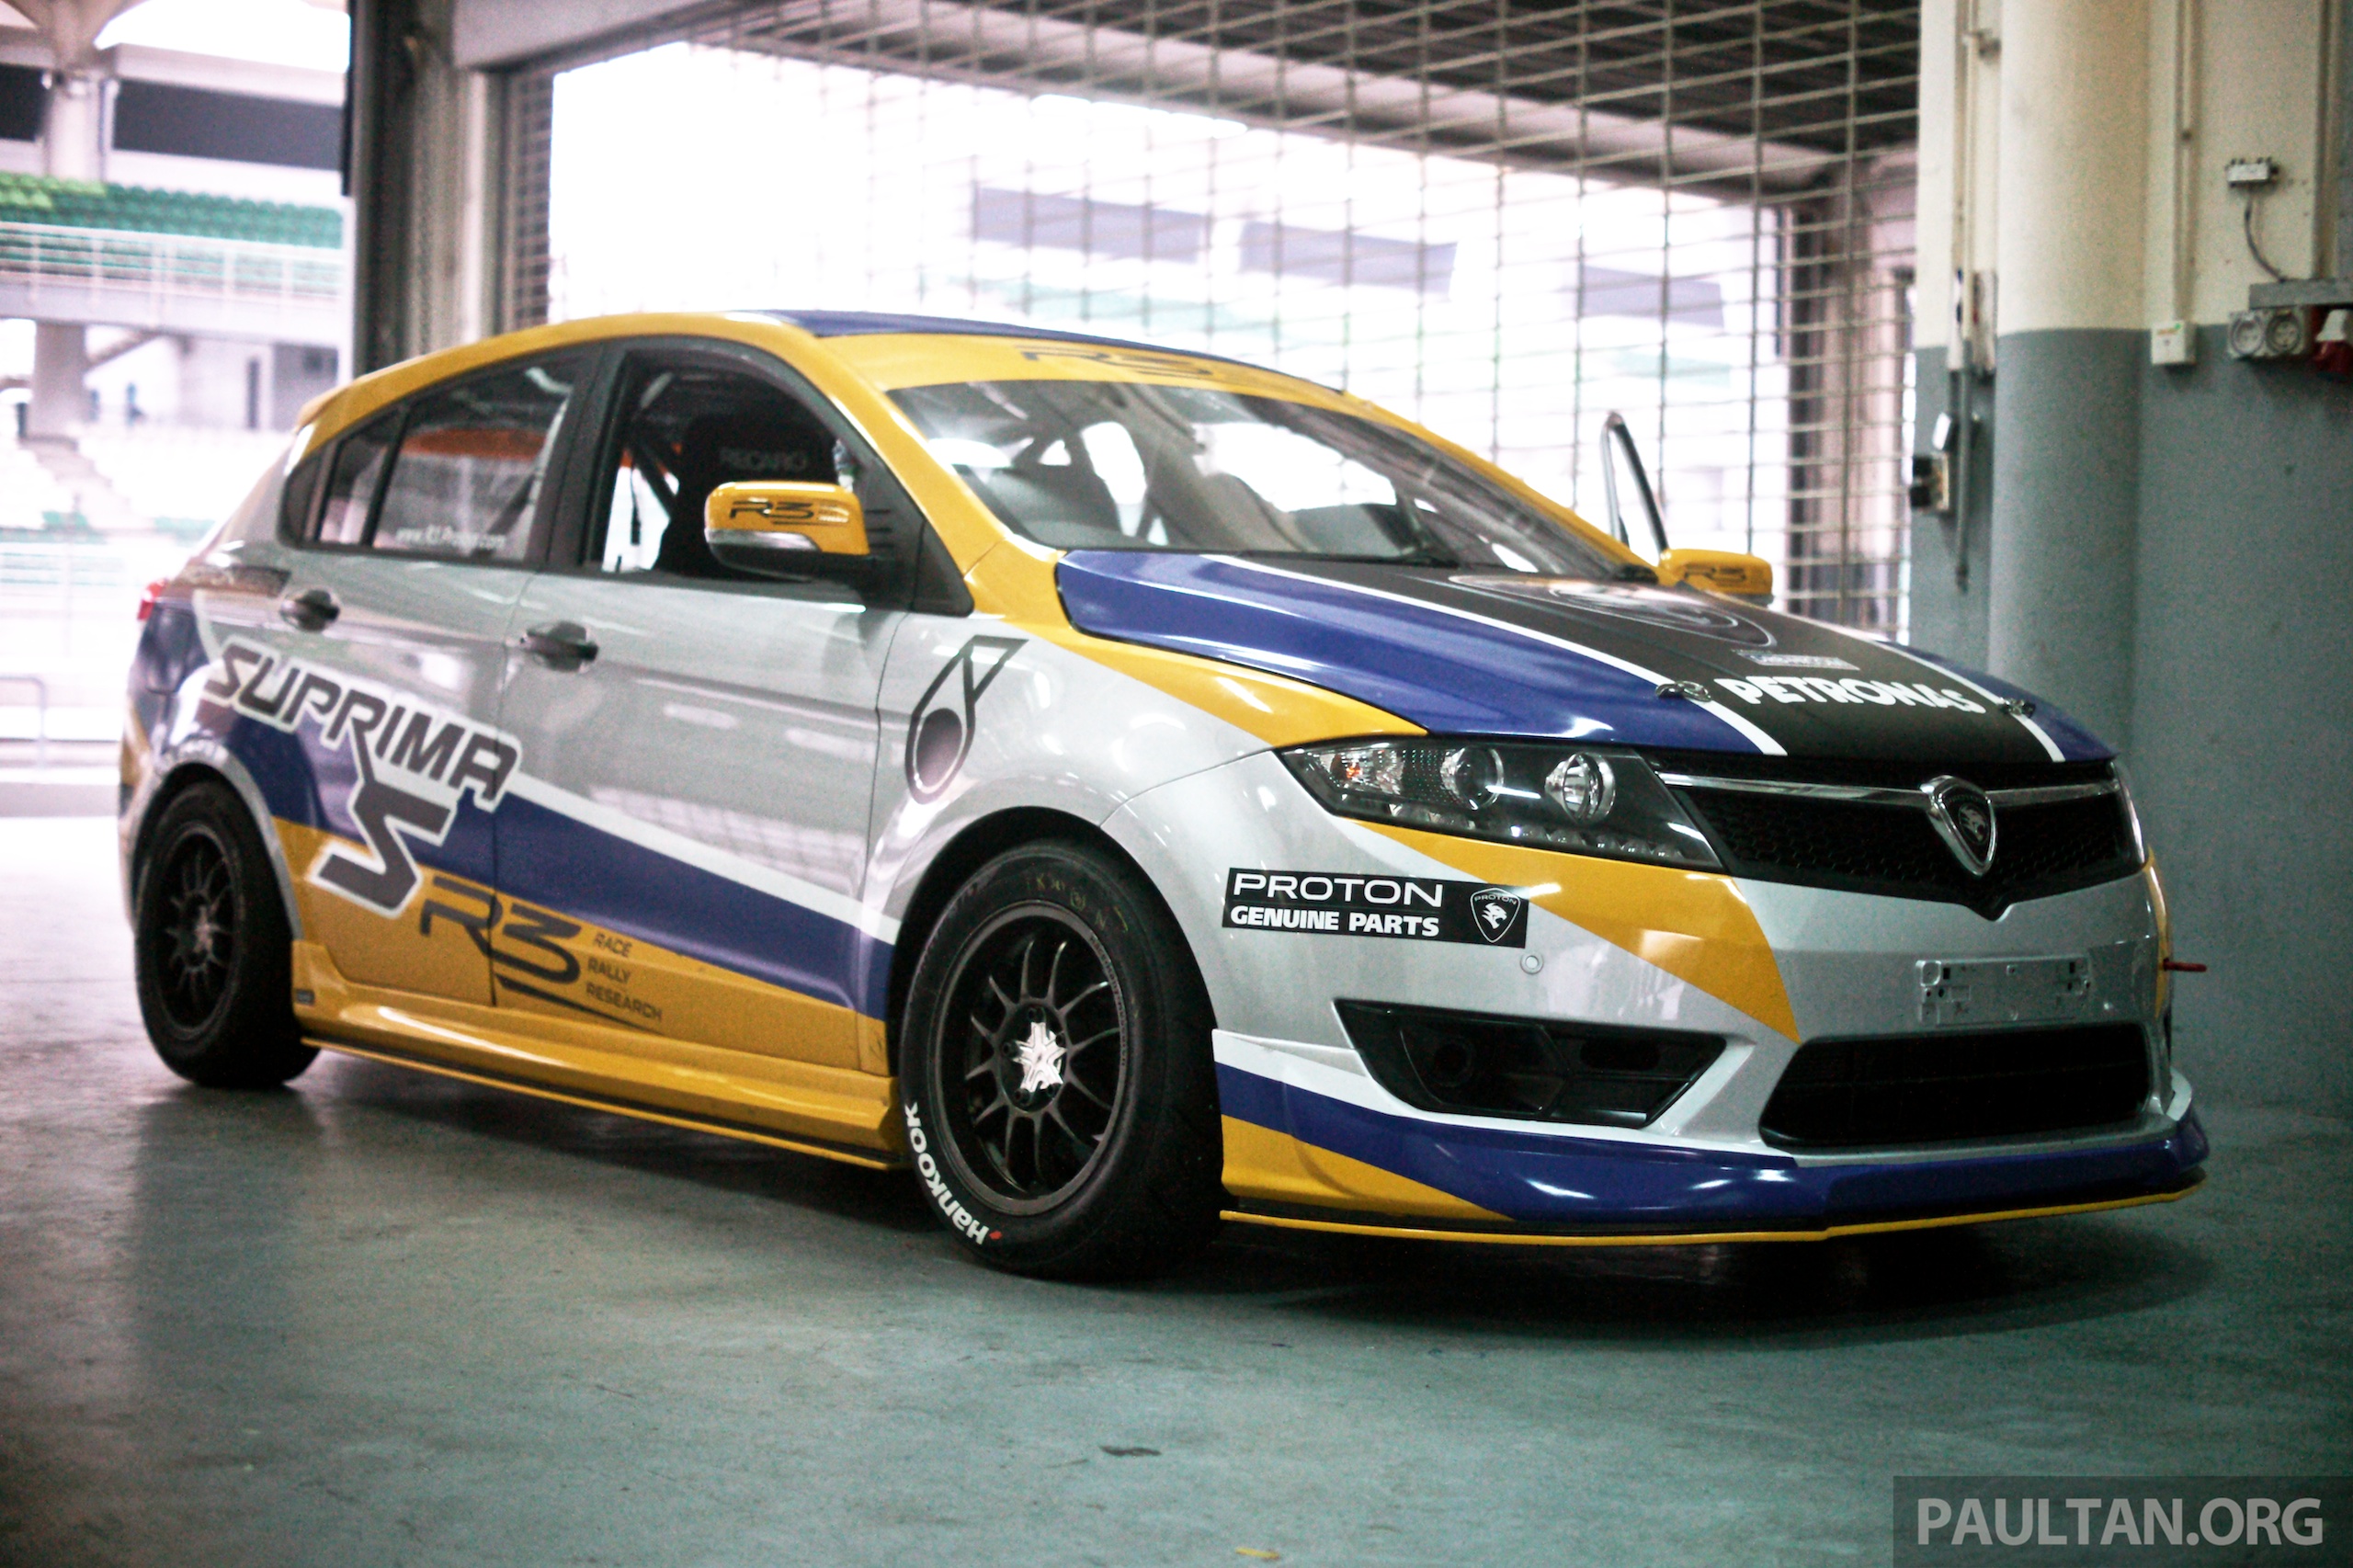 A first taste of Sepang – getting a ride in the Proton R3 Suprima S